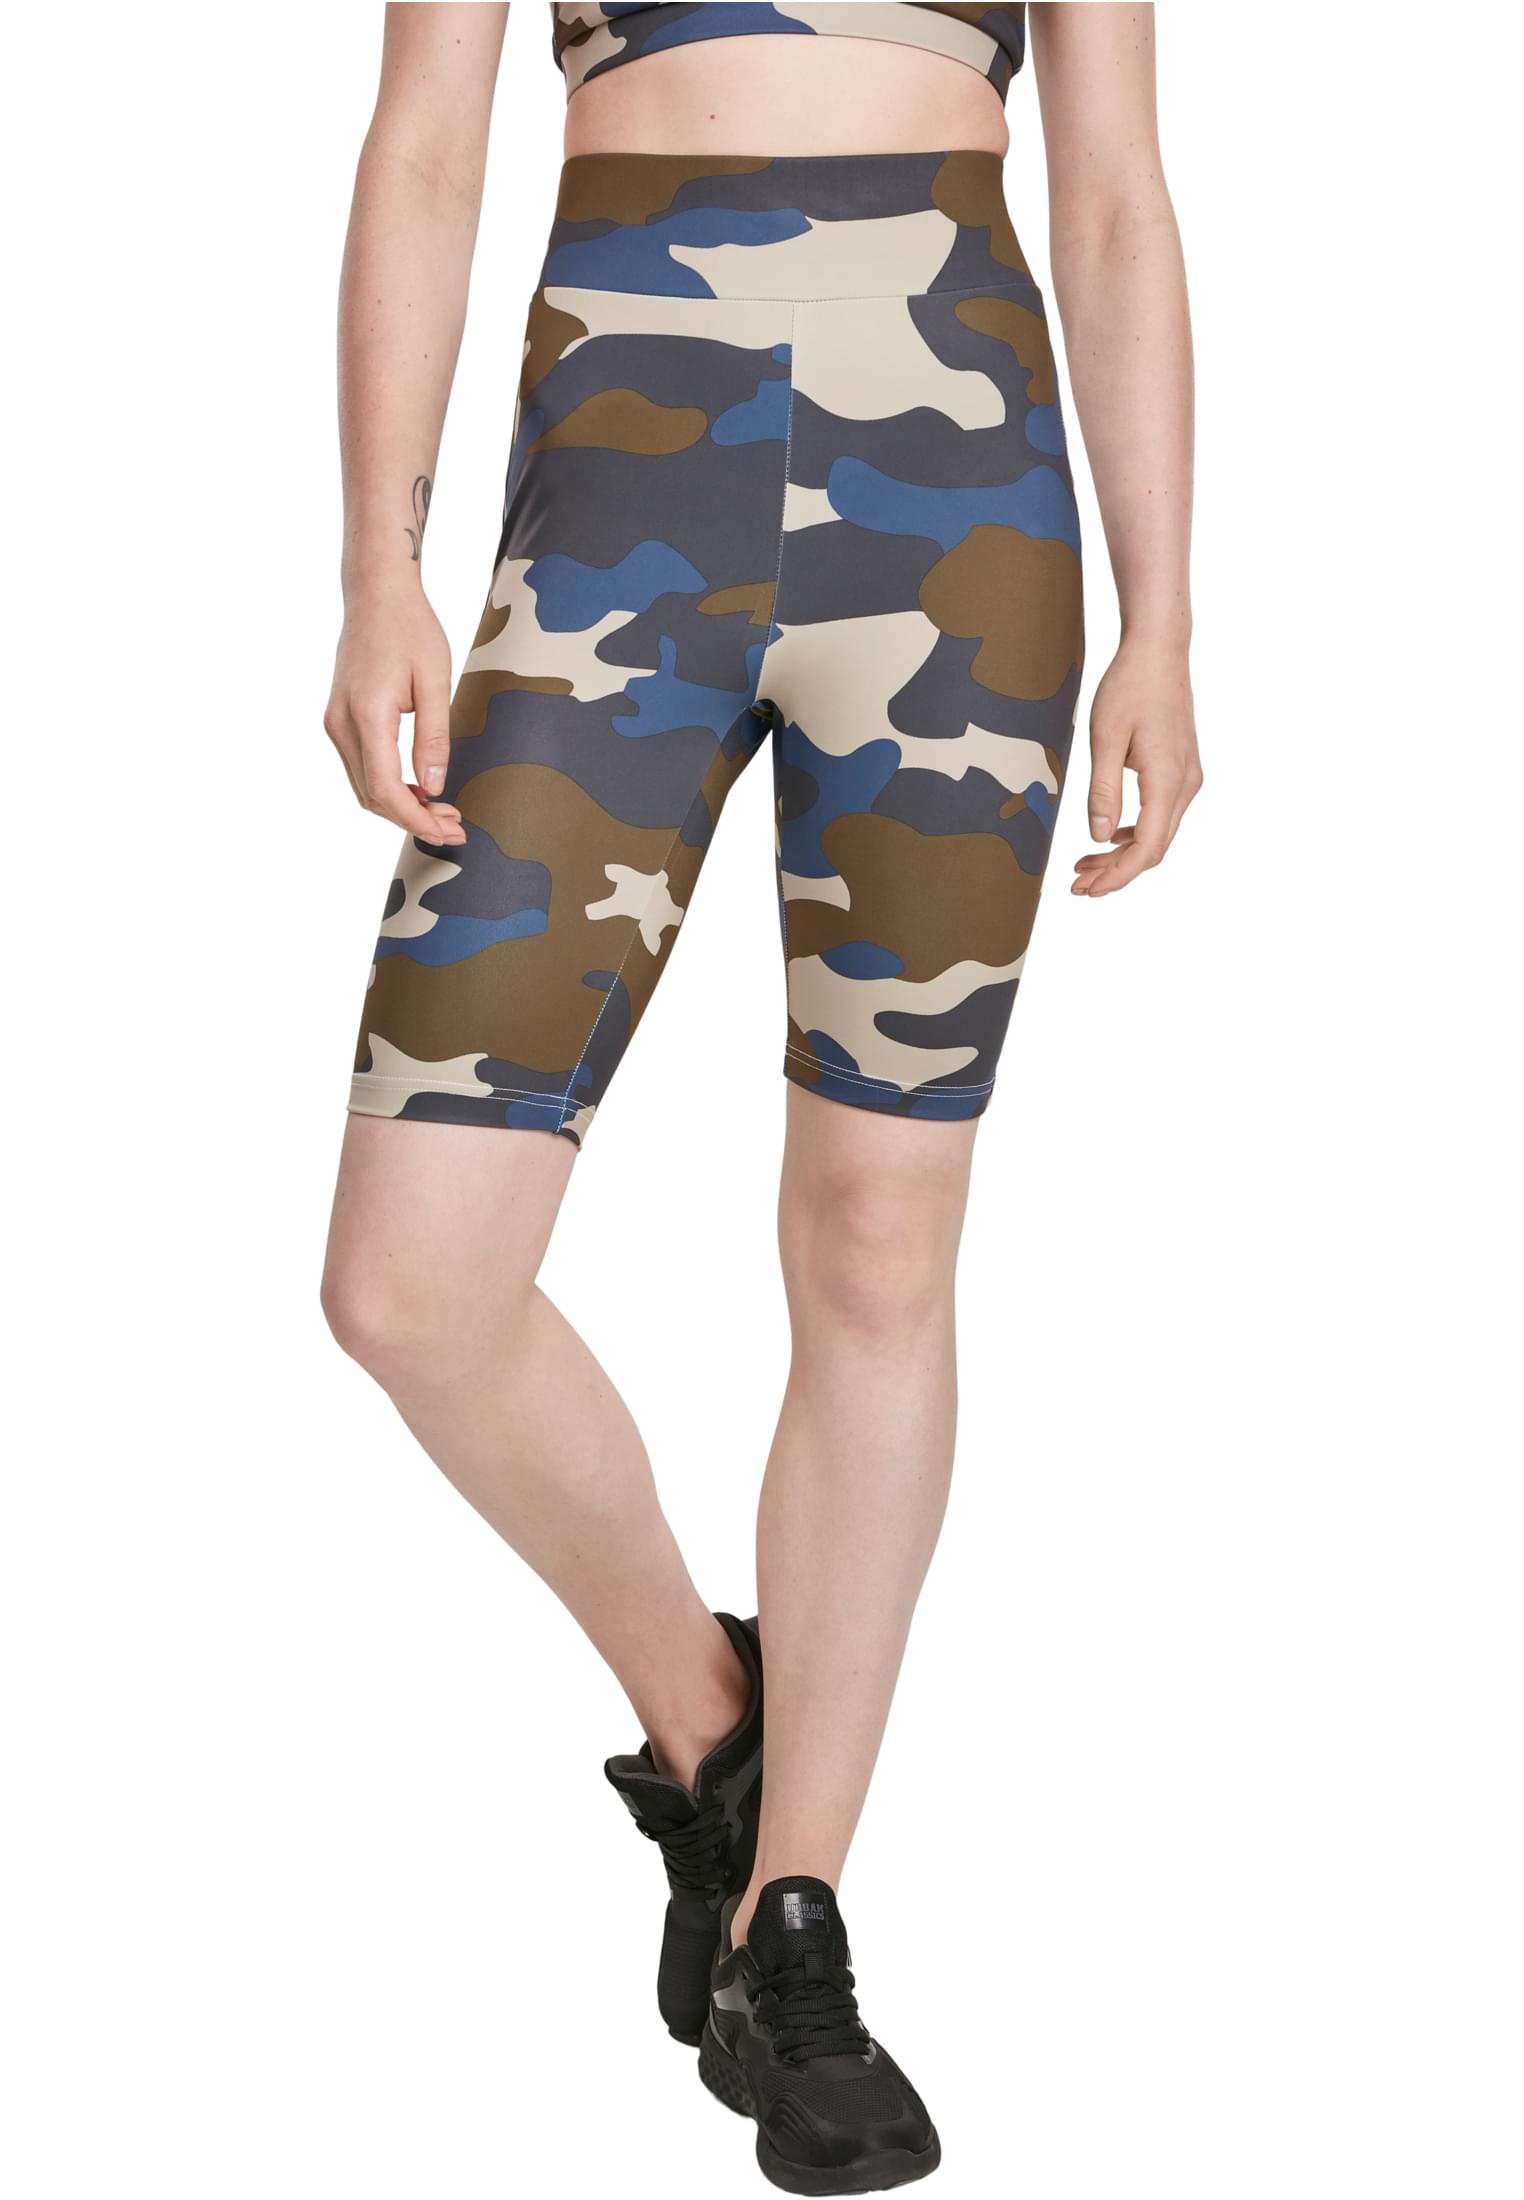 Bekleidung Ladies High Waist Camo Tech Cycle Shorts Double Pack in Farbe summerolive camo/summerolive